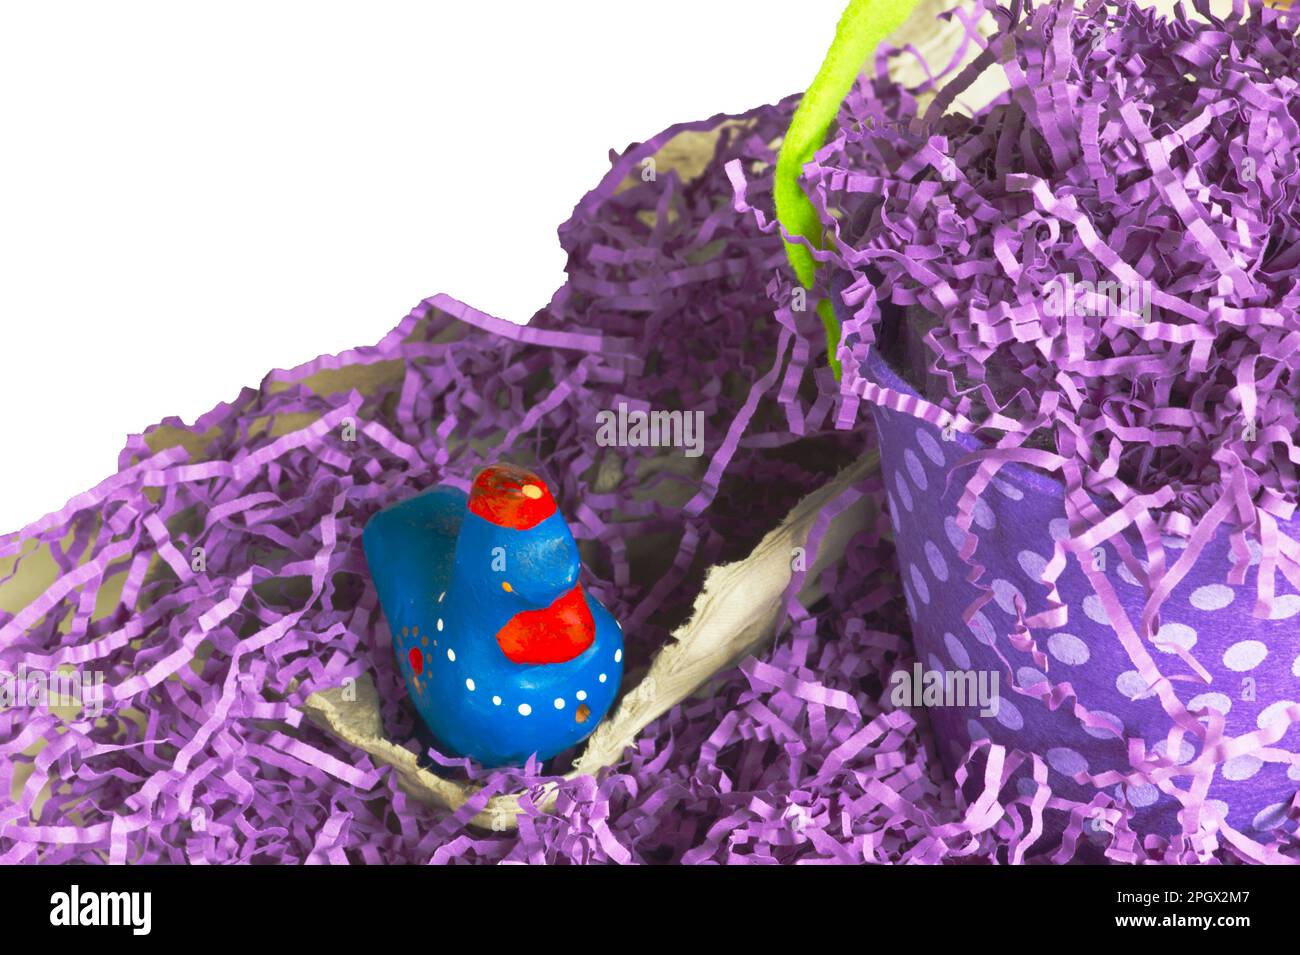 Easter grass with purple polkadot basket or pail placed by a chicken figure. Text space comes with image. Chicken is kitten on an egg carton. Stock Photo